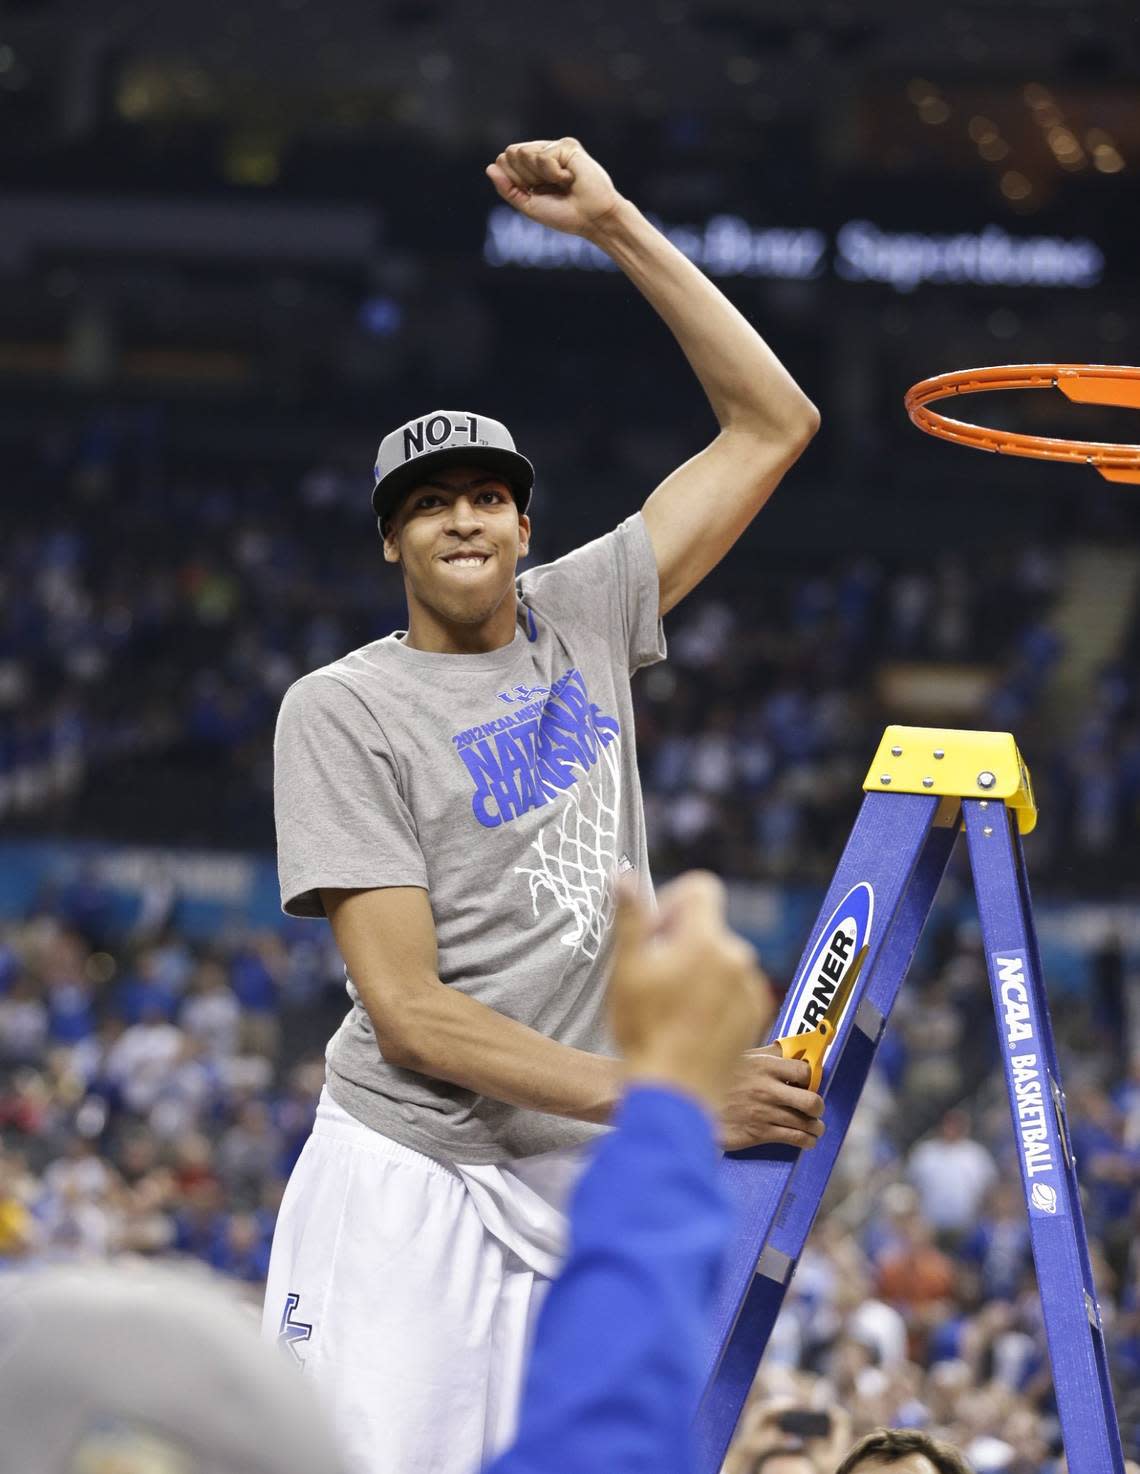 Anthony Davis (23) led Kentucky to the 2012 NCAA title by producing one of the best individual seasons ever by a UK player.